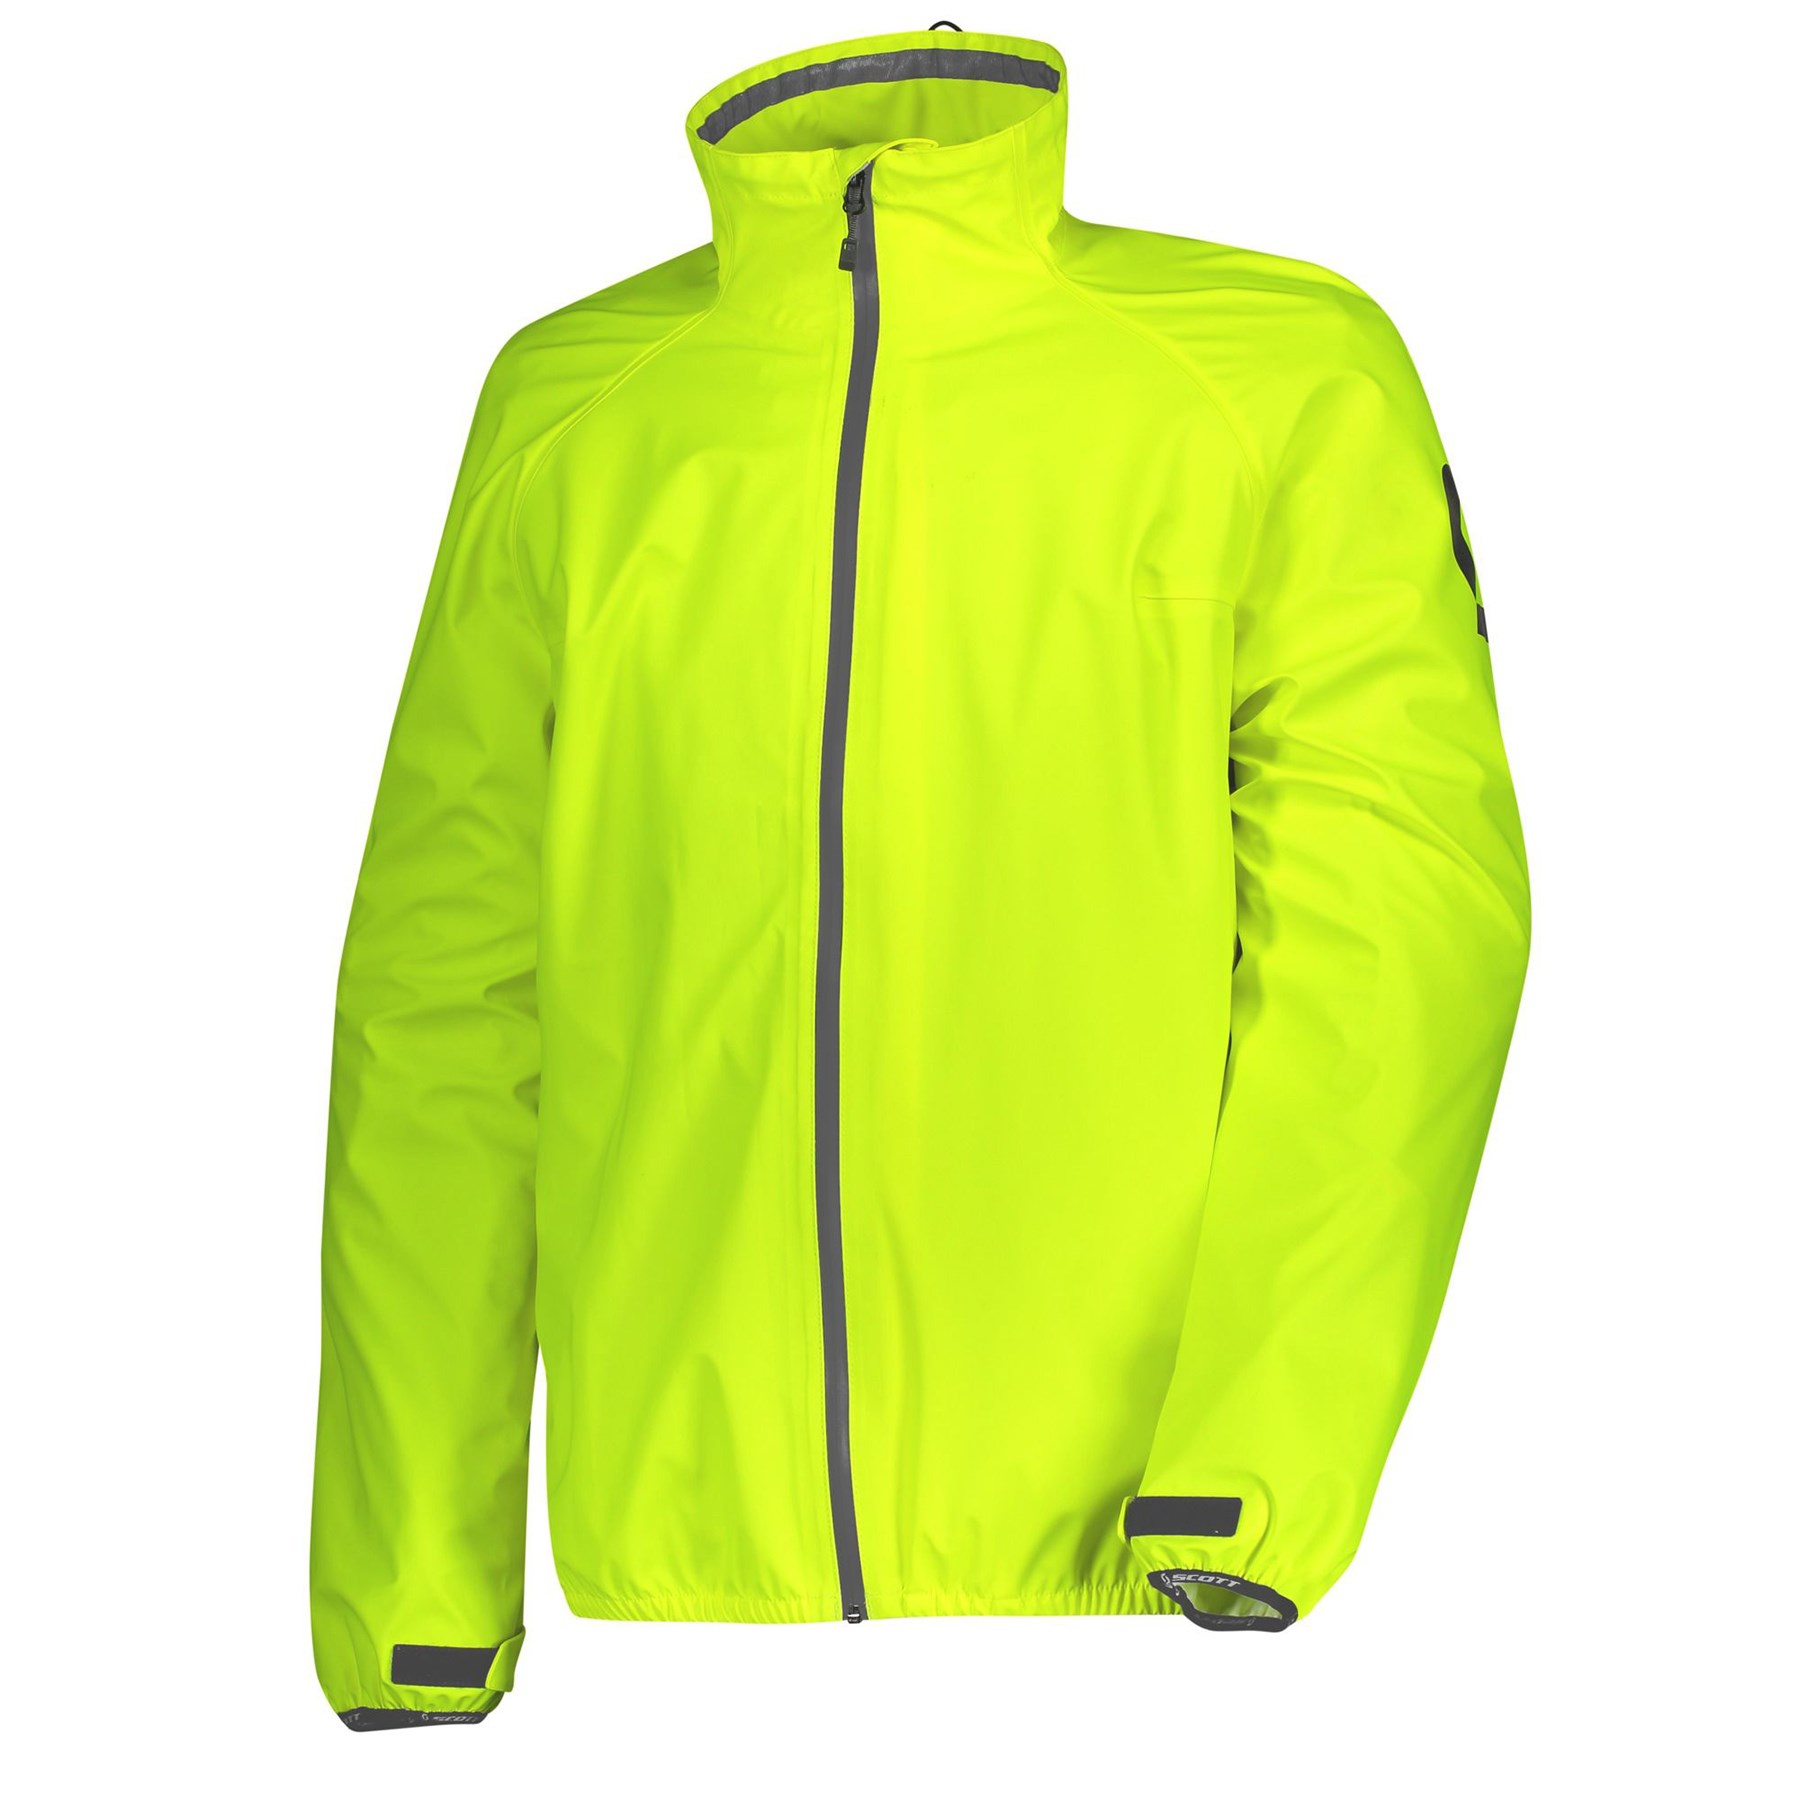 Riding Jackets  Buy Bike Riding Jackets For Men  Royal Enfield Store